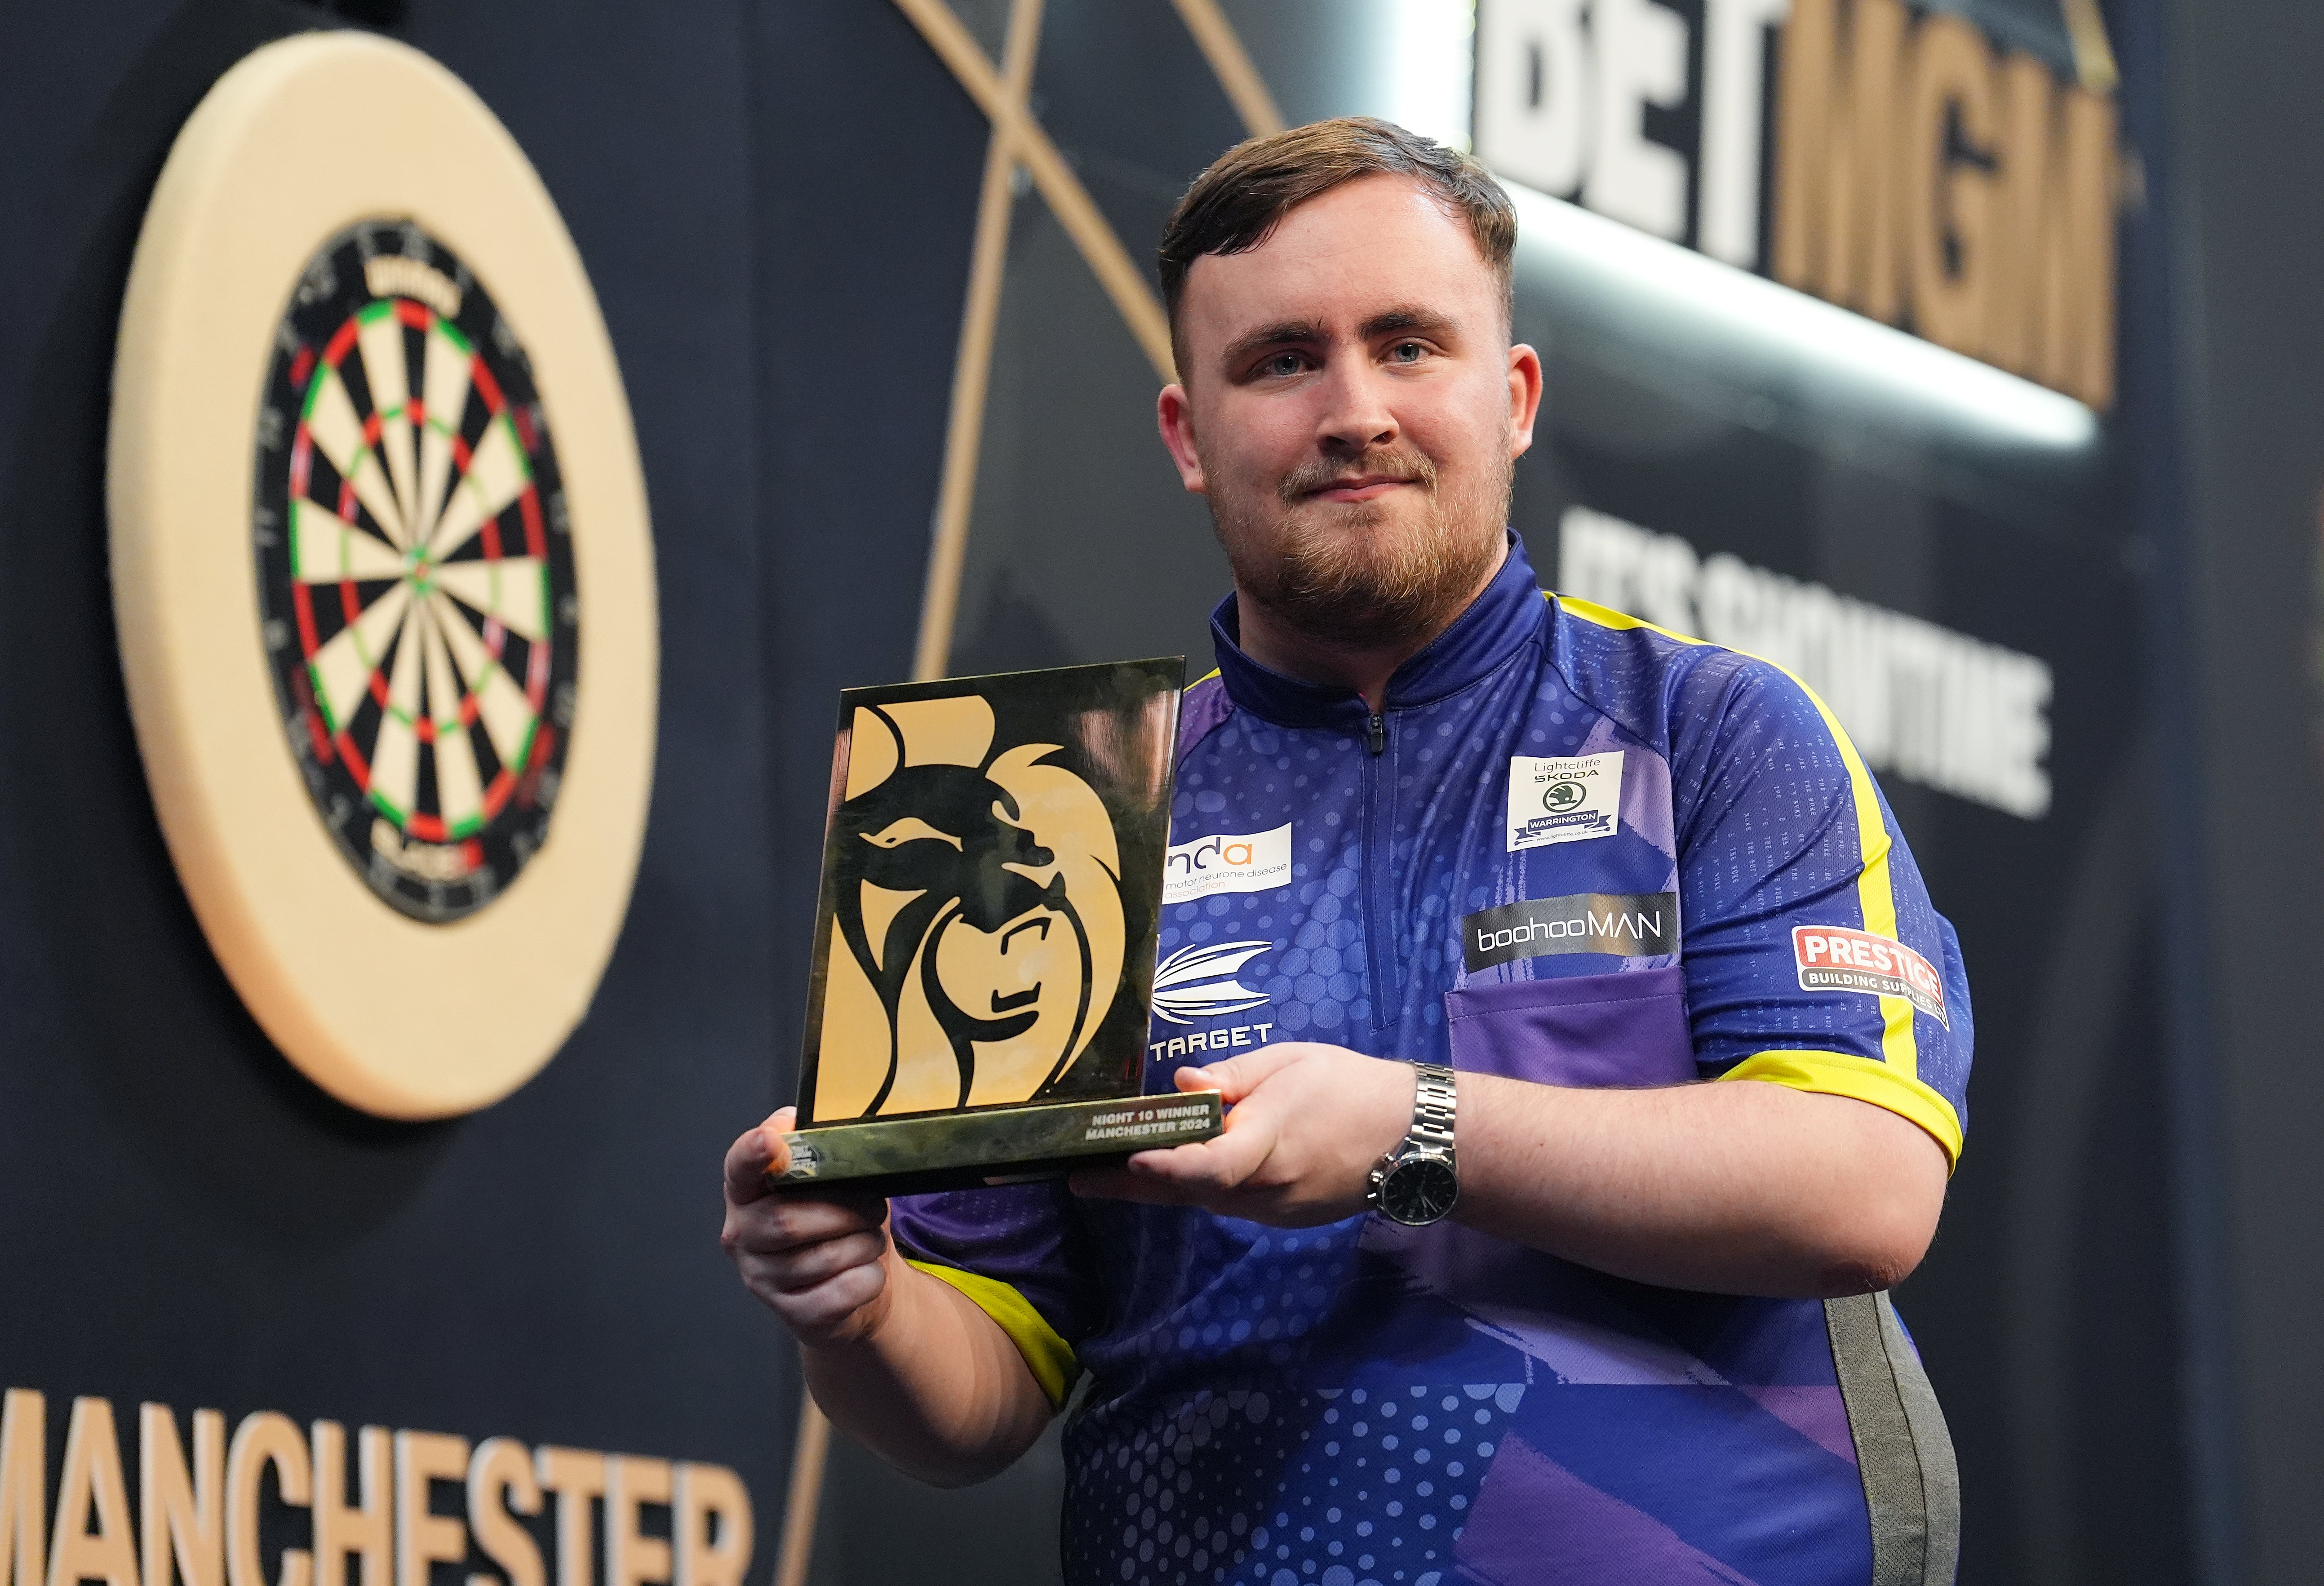 Luke Littler bounced back from seeing his beloved Manchester United lose to Chelsea by winning night 10 of the Premier League Darts